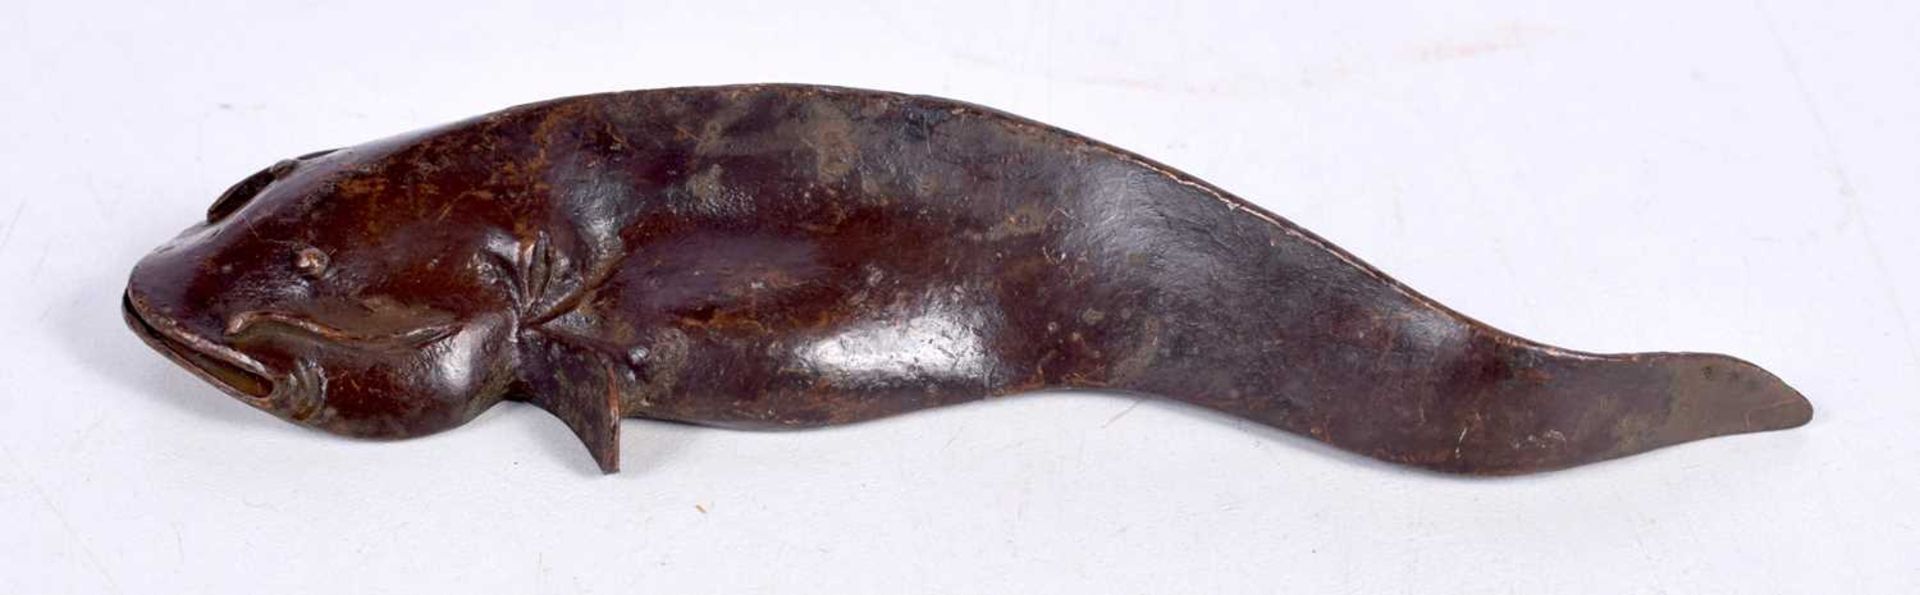 A BRONZE MODEL OF A CATFISH. 12.3cm x 4cm x 1.8 cm, weight 174g - Image 2 of 3